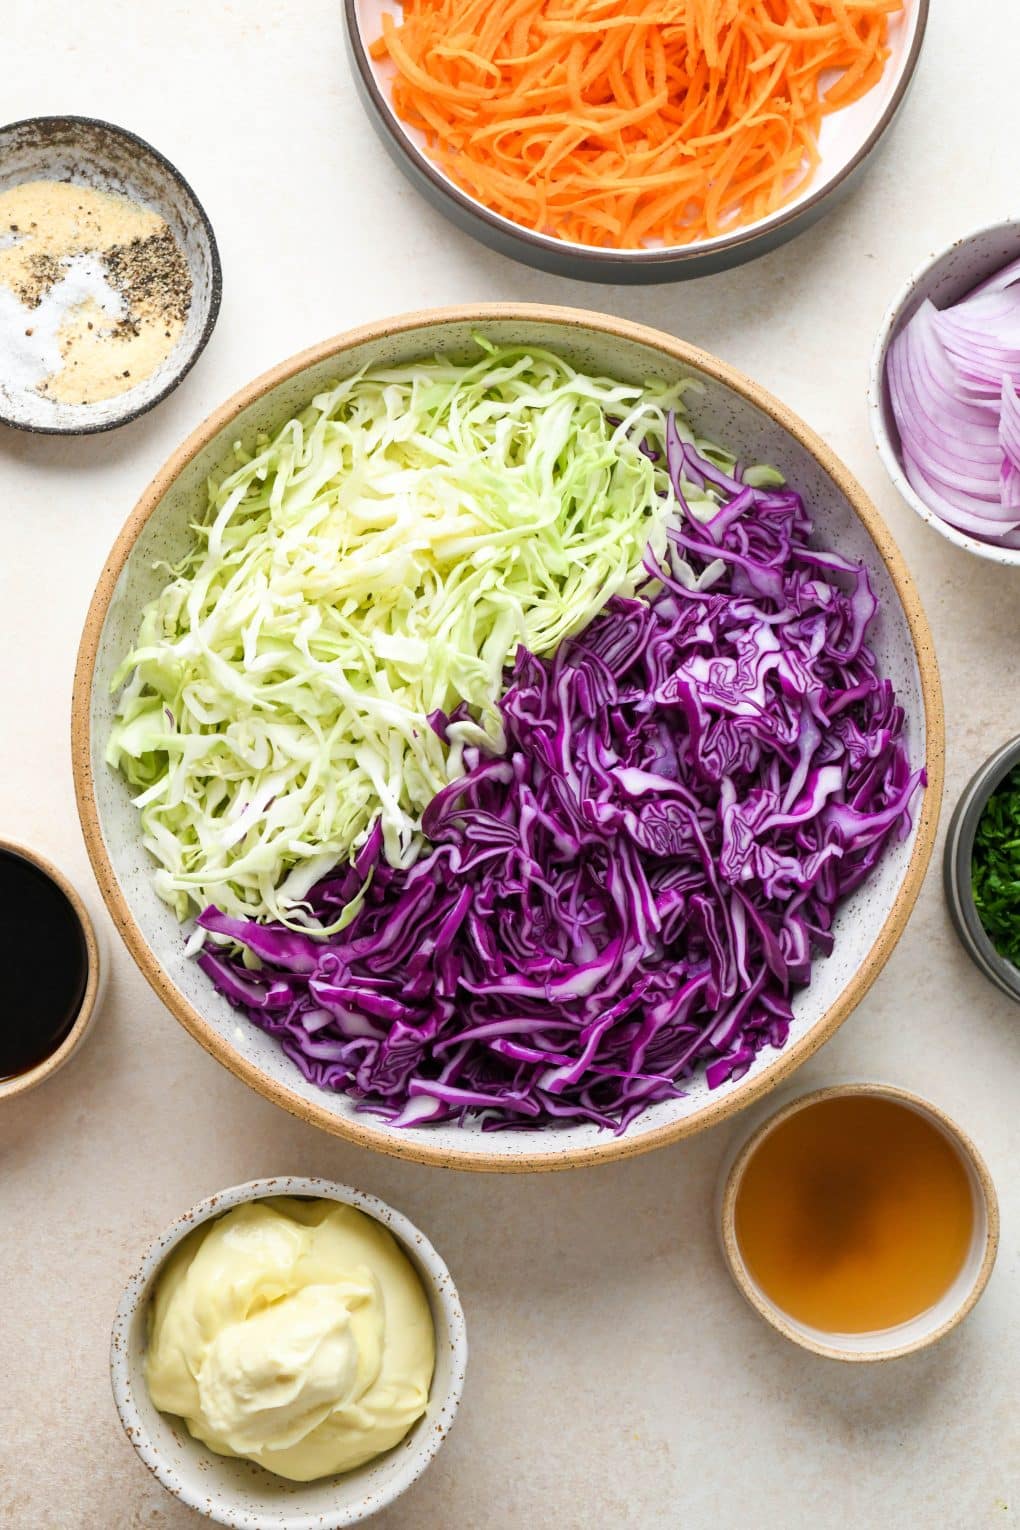 Ingredients for Whole30 coleslaw in various sized ceramics on a light cream colored background.